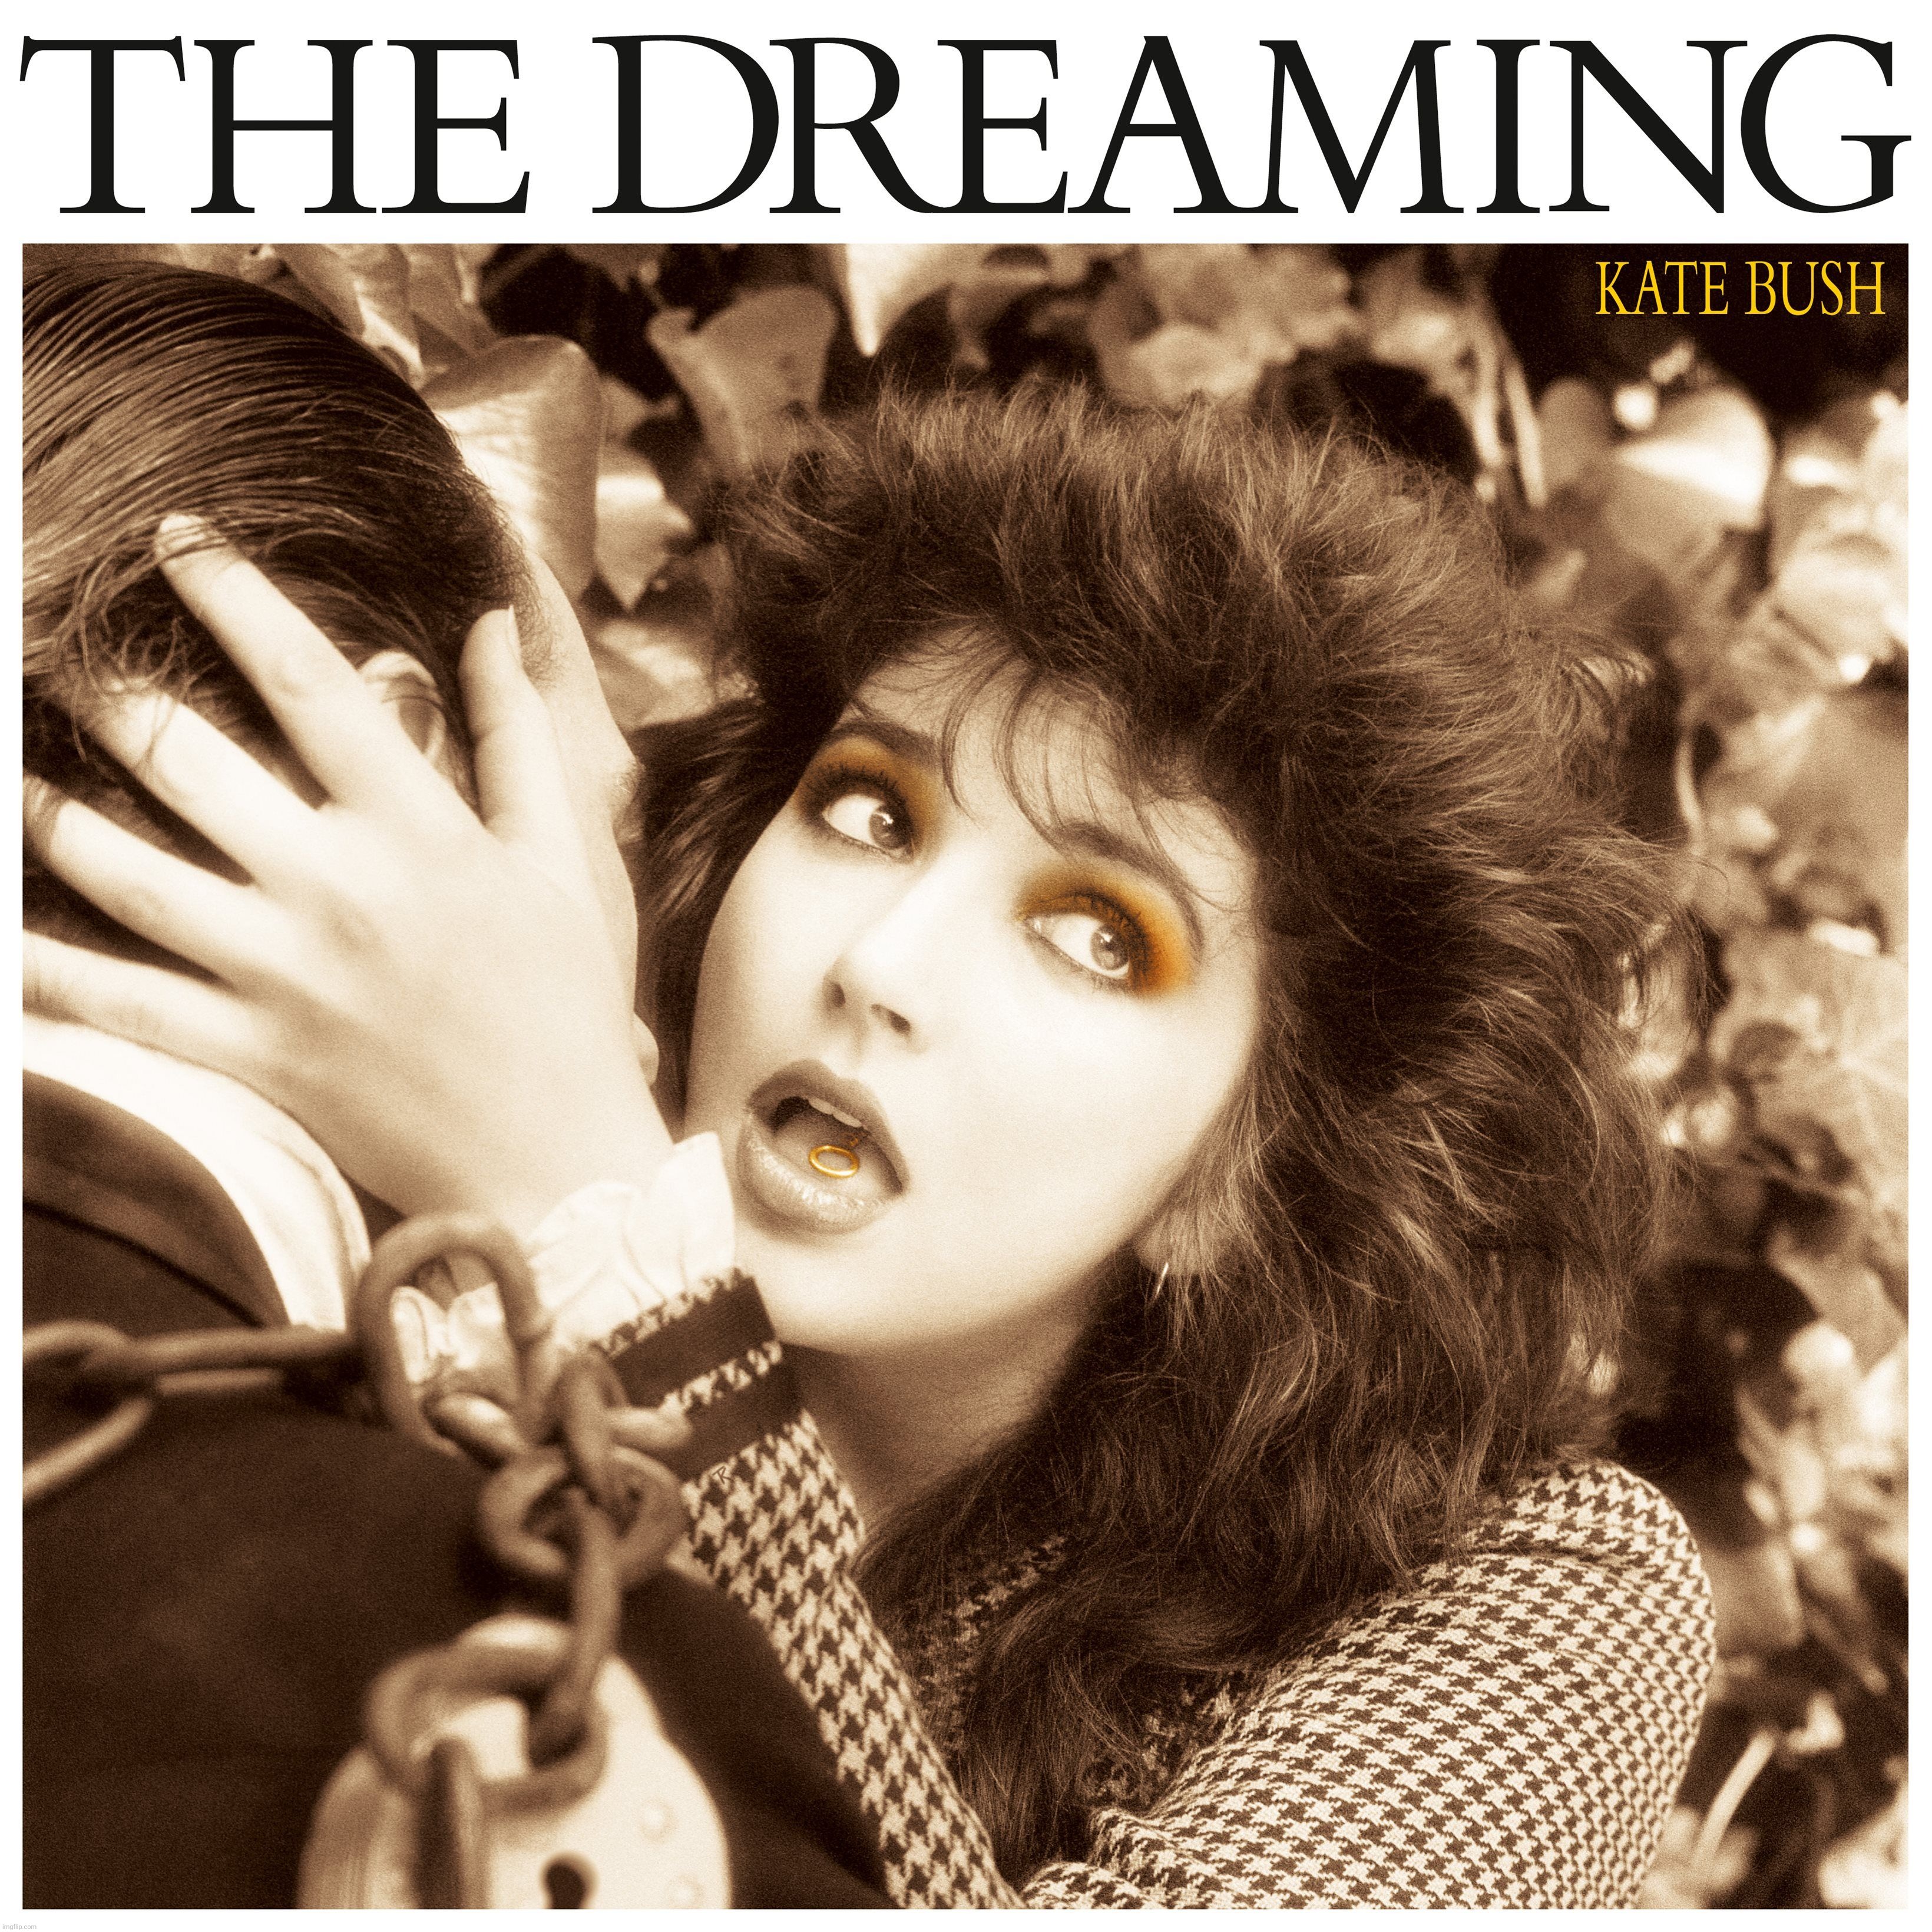 Hardly under the radar, but it was in America | image tagged in kate bush,the dreaming | made w/ Imgflip meme maker